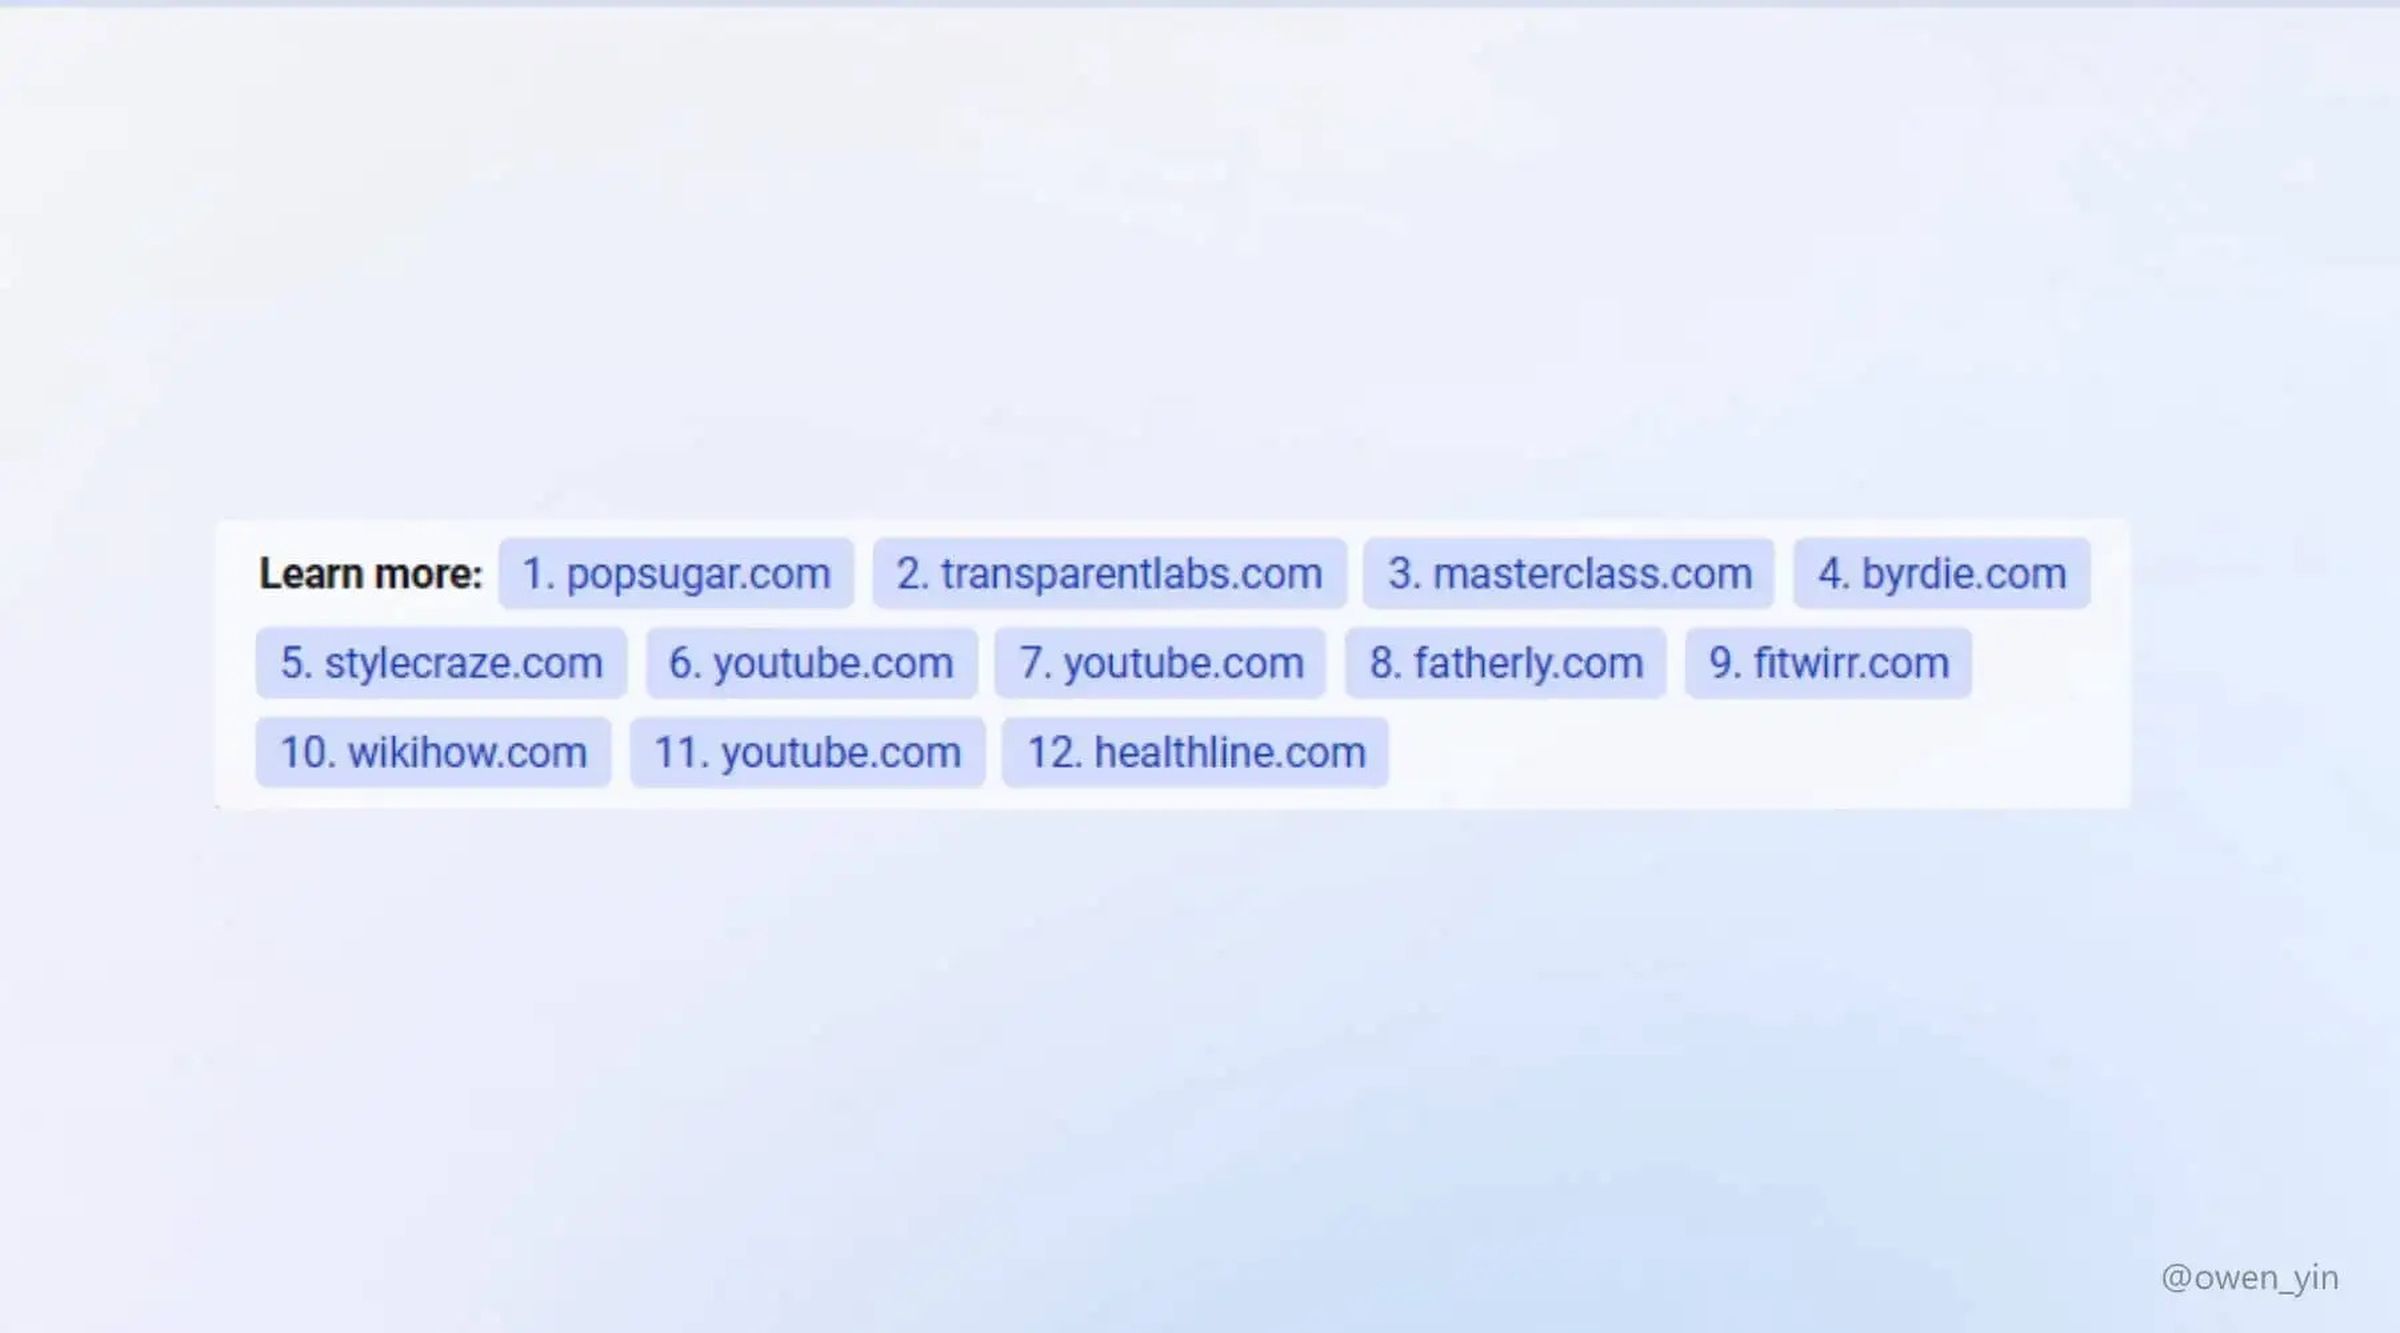 A screenshot showing a list of URLs, apparently sources cited by the new Bing in answer to a question.